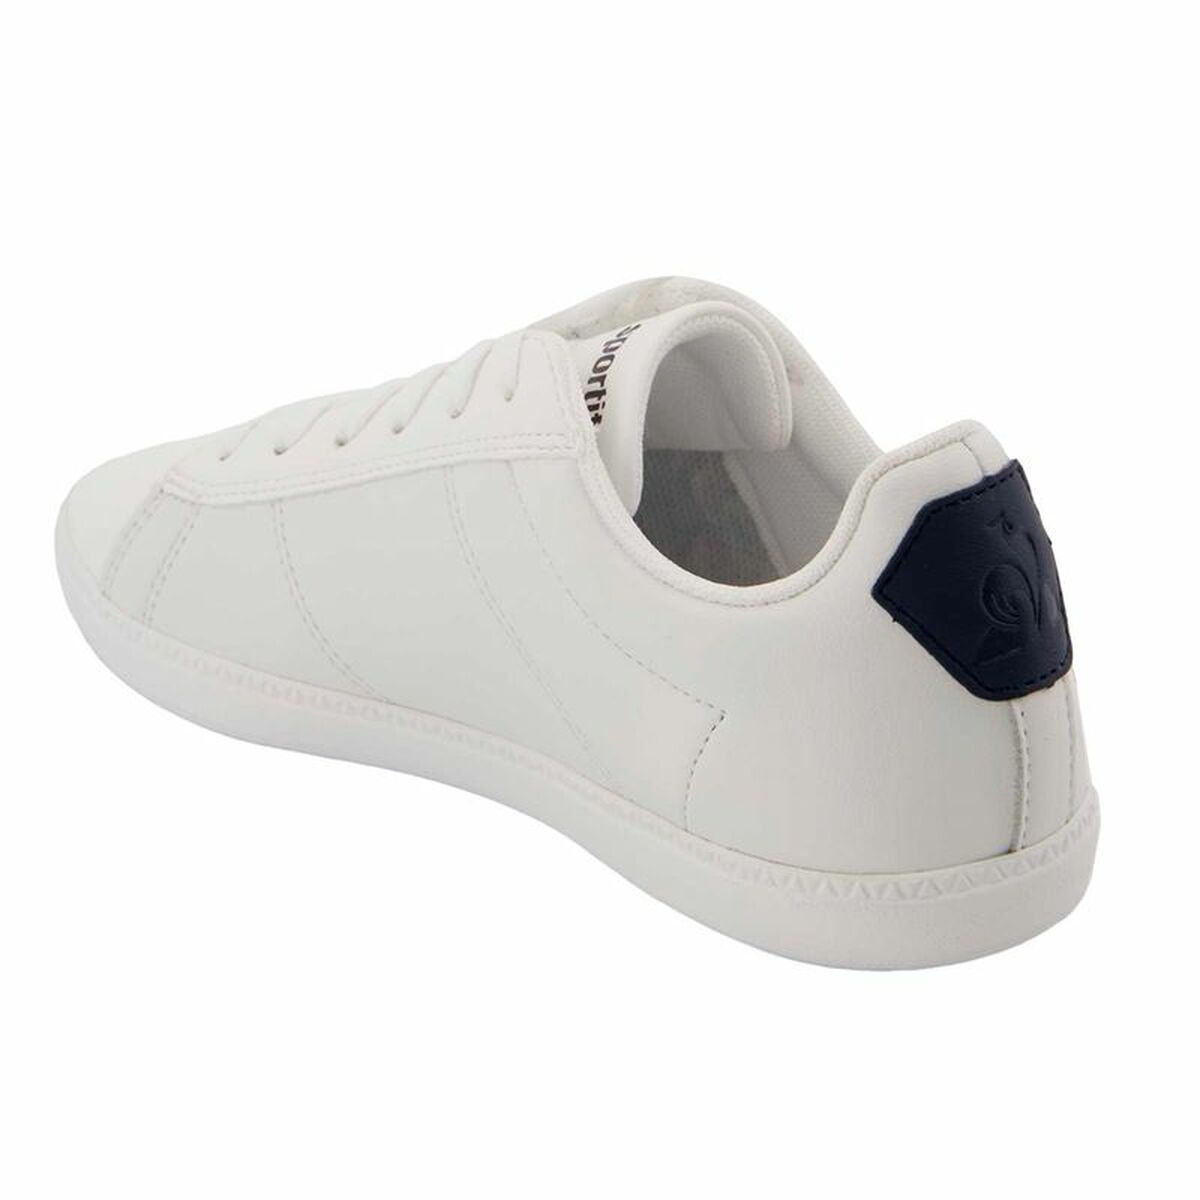 Sports Shoes for Kids Le coq sportif Courtclassic Gs White